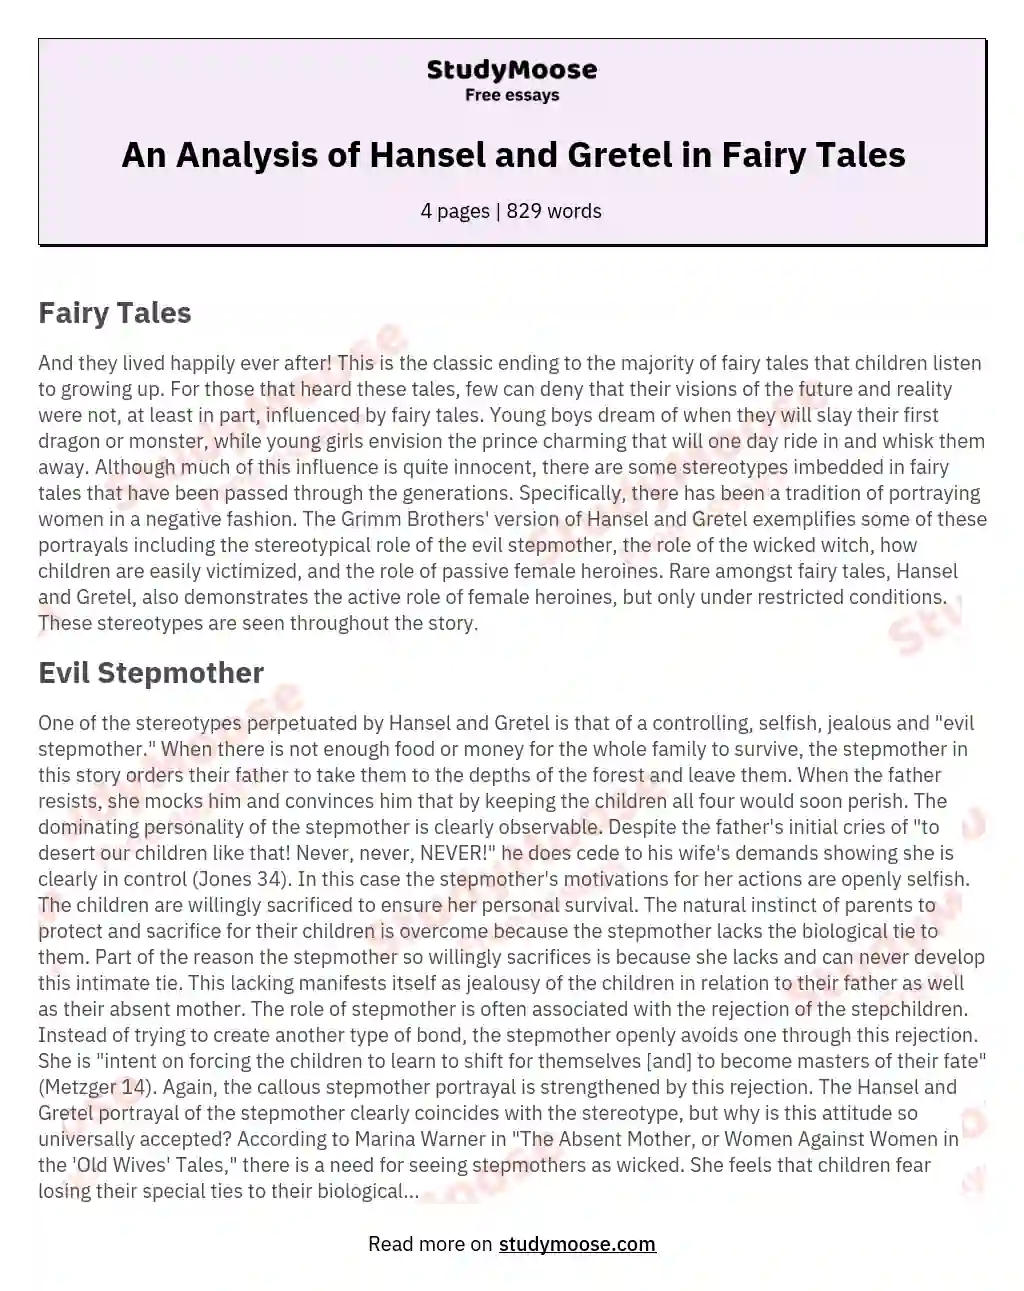 An Analysis of Hansel and Gretel in Fairy Tales essay